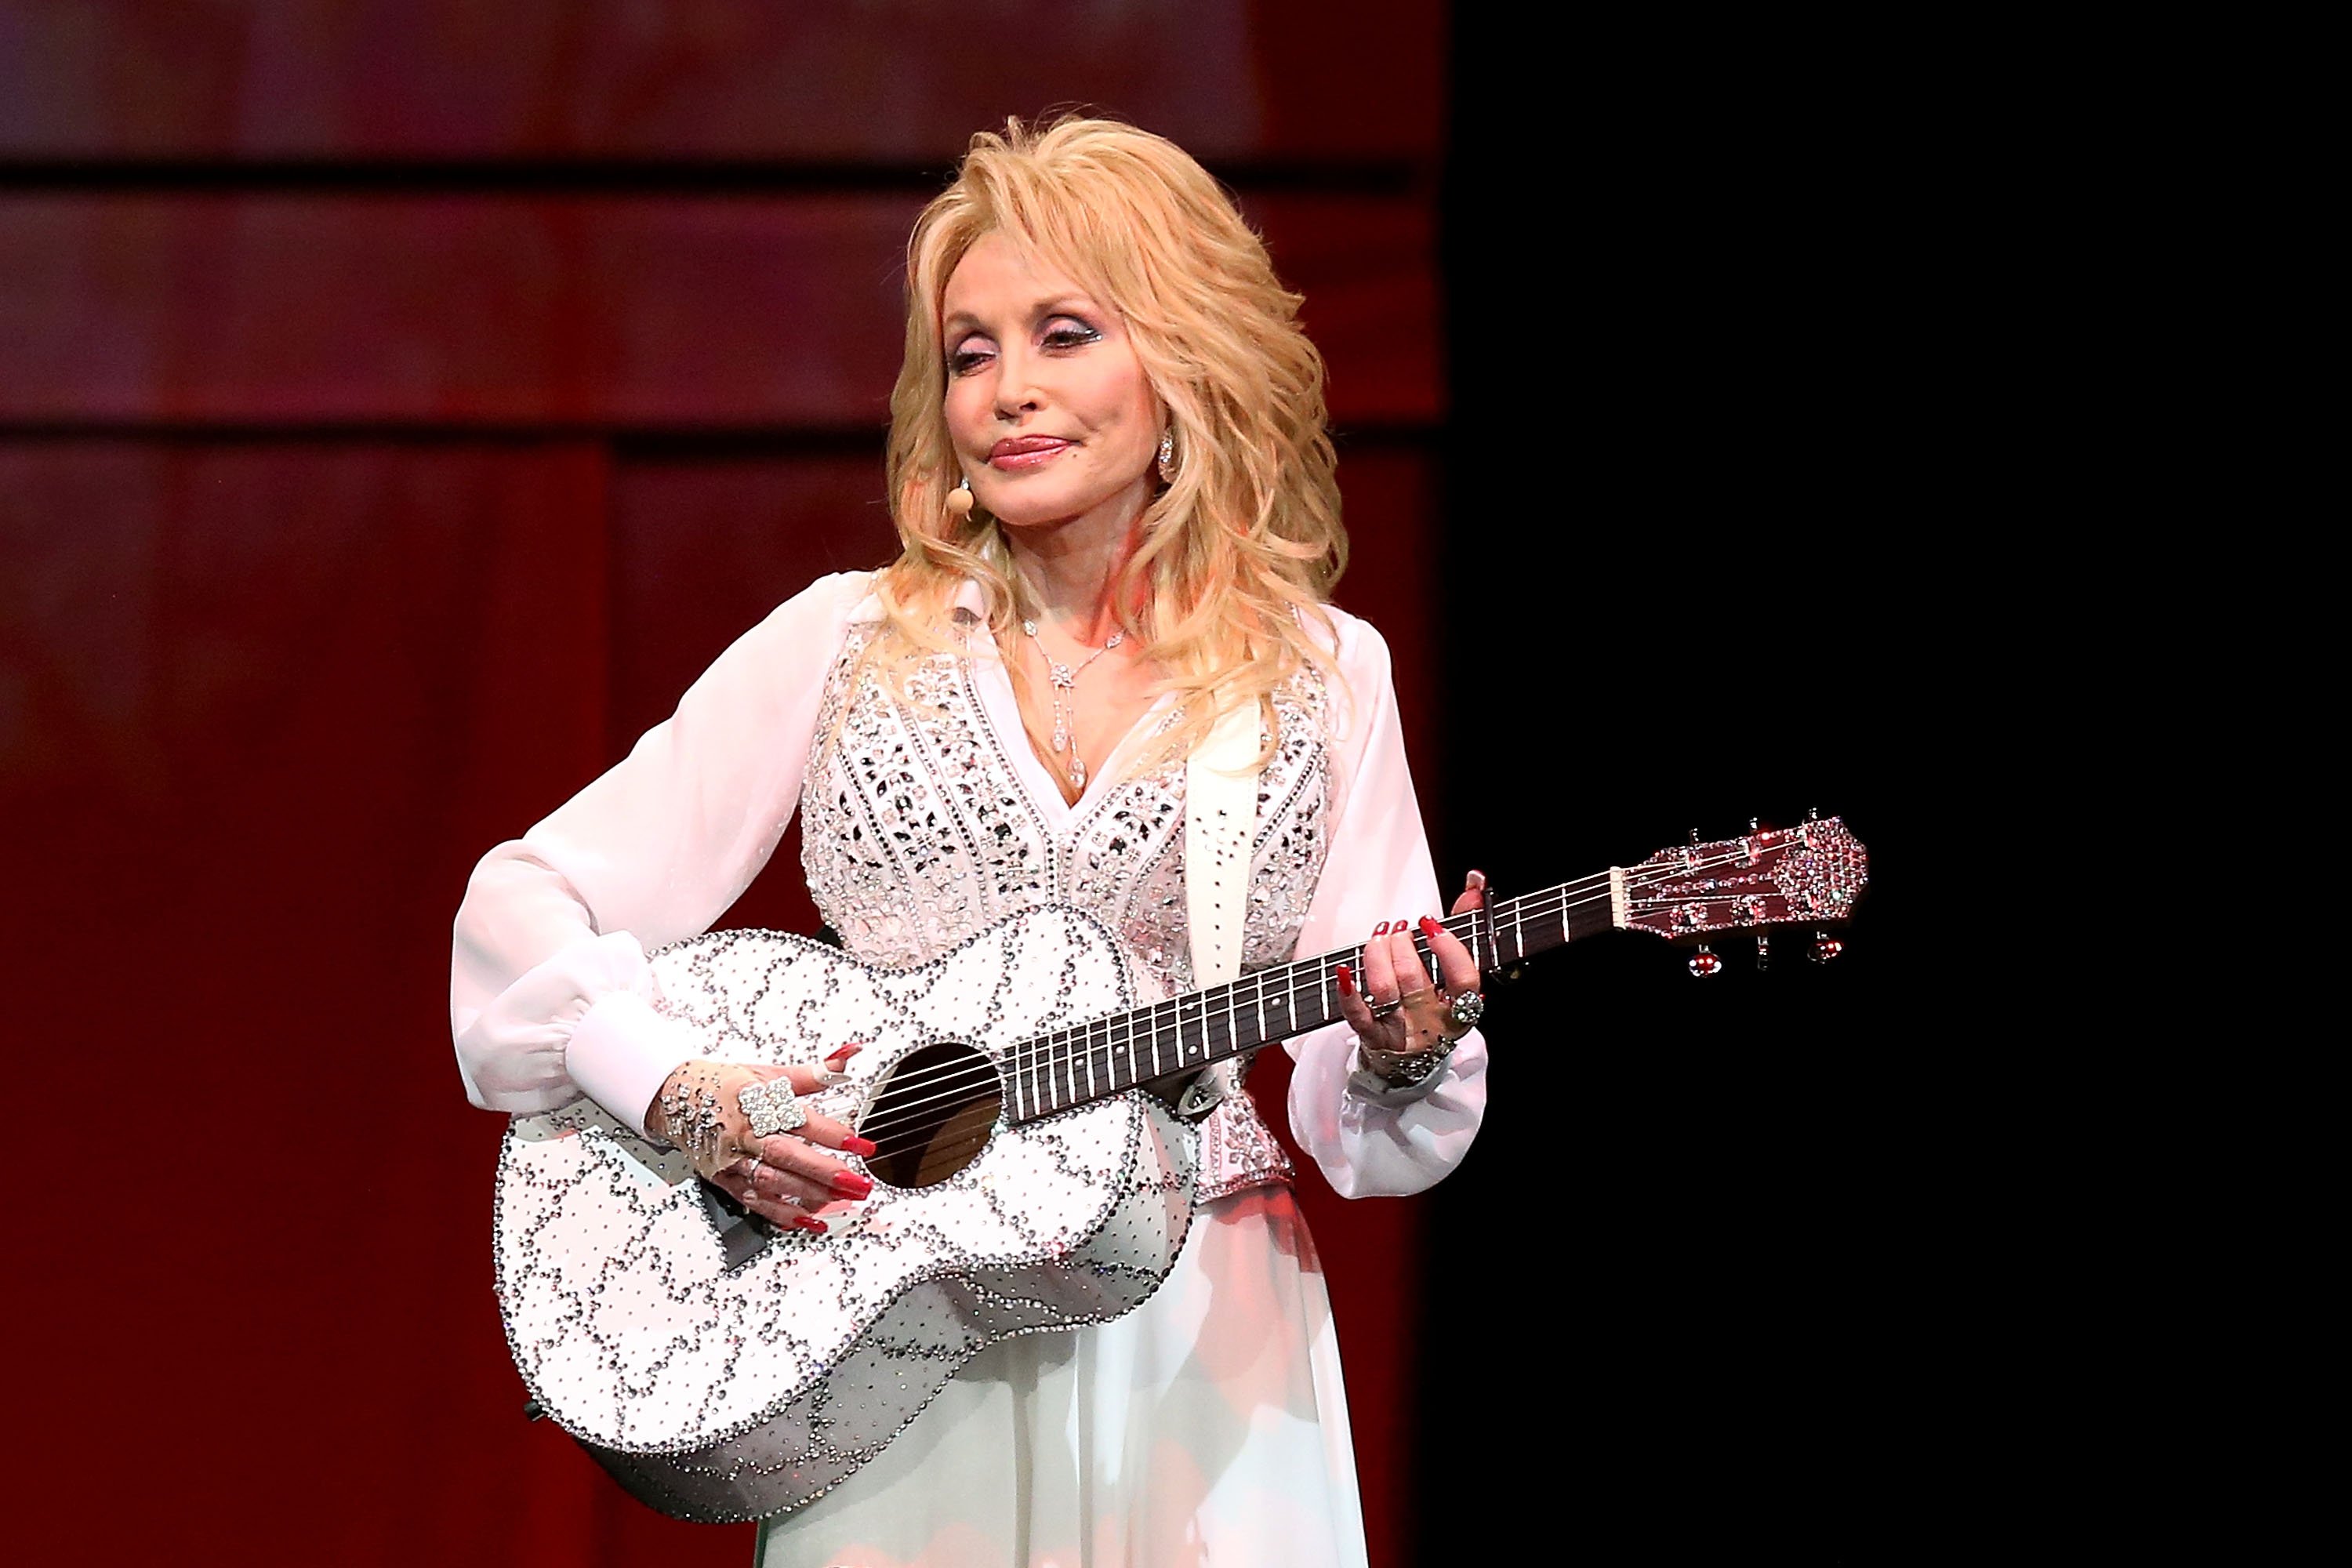 Dolly Parton on ‘Mistreating Mother Nature’: ‘We’re so Freely Messing Up’